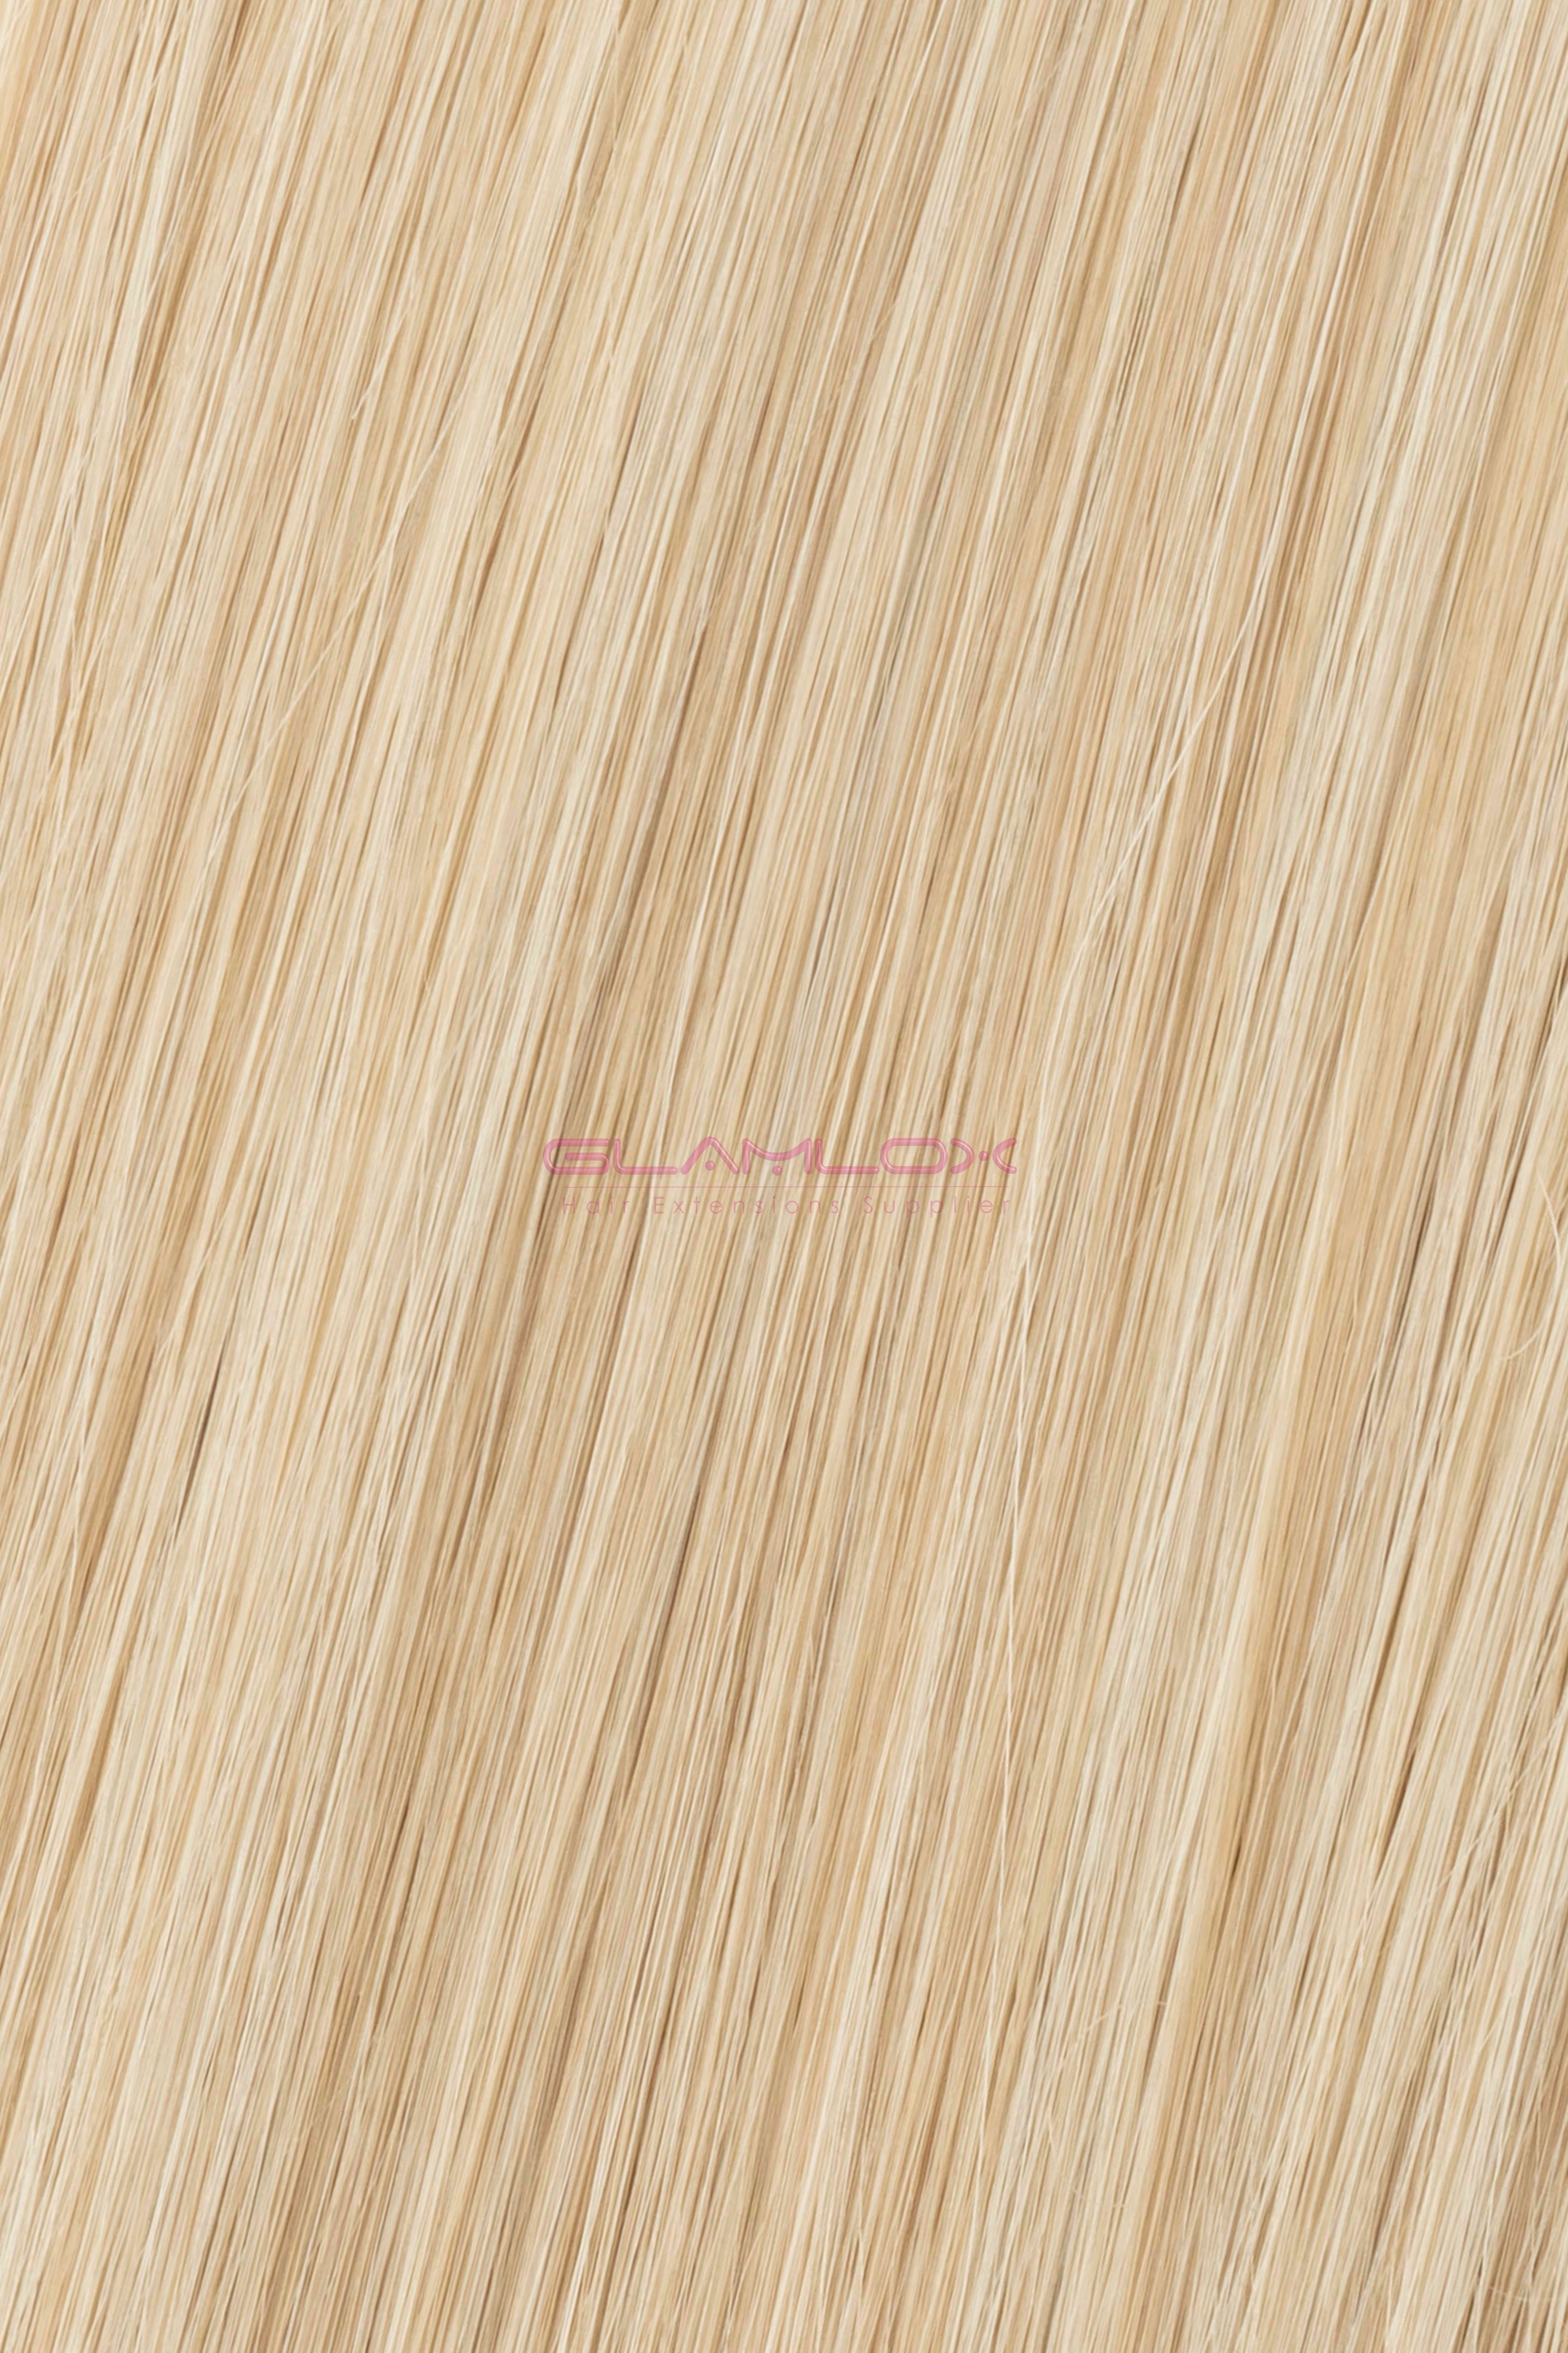 20"-21" I-TIP - Russian Mongolian Double Drawn Remy Human Hair - 20 Strands